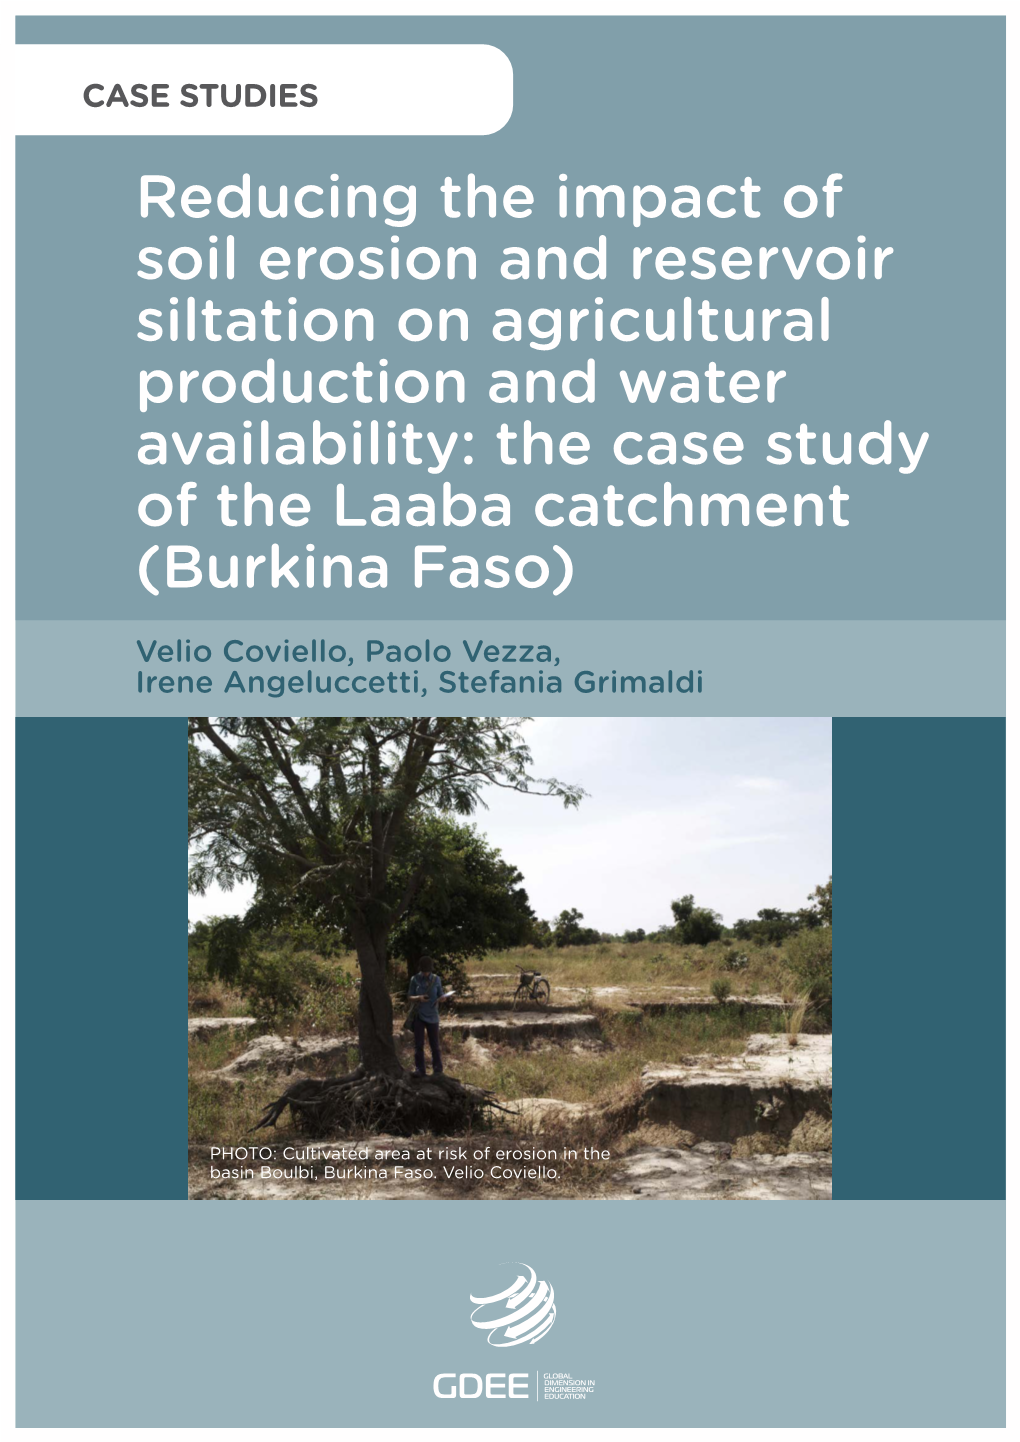 Reducing the Impact of Soil Erosion and Reservoir Siltation on Agricultural Production and Water Availability: the Case Study of the Laaba Catchment (Burkina Faso)